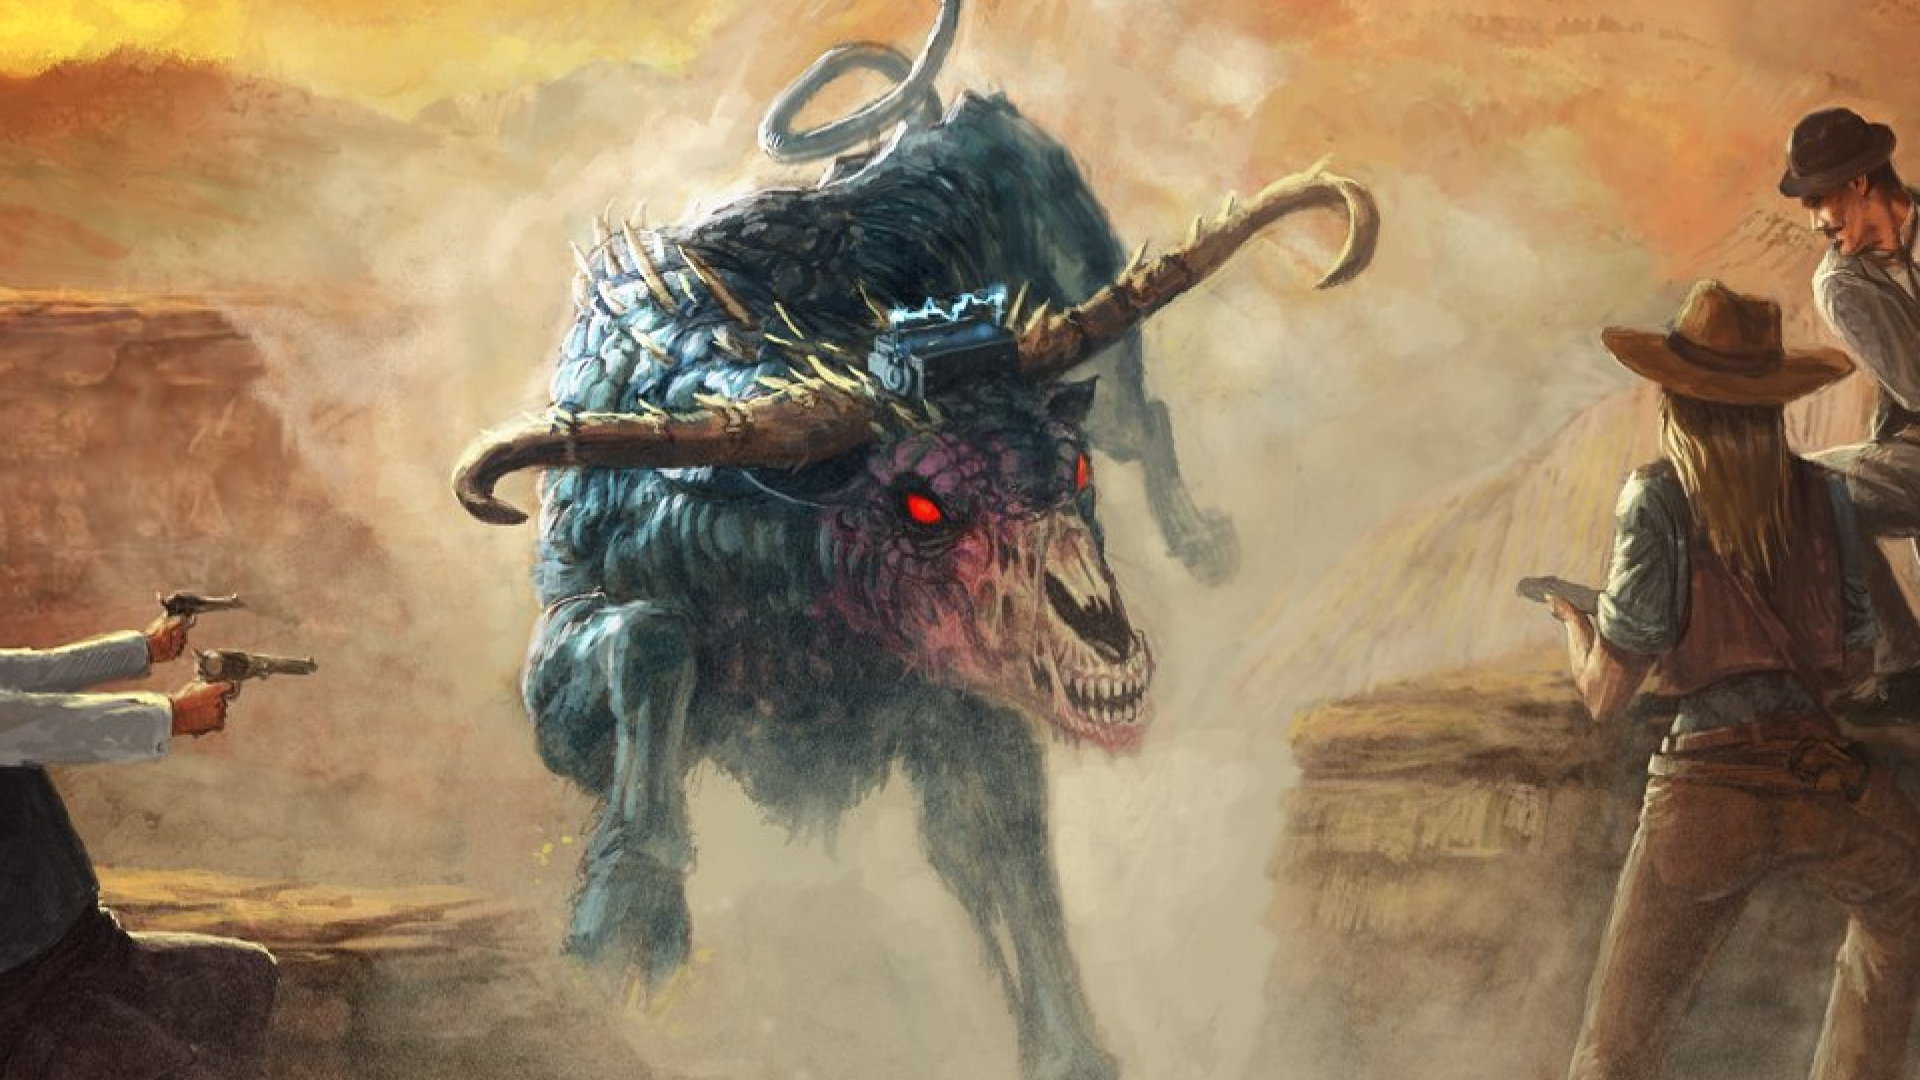 Weird West RPG Deadlands wrangles three adventures into a new hardcover boo...